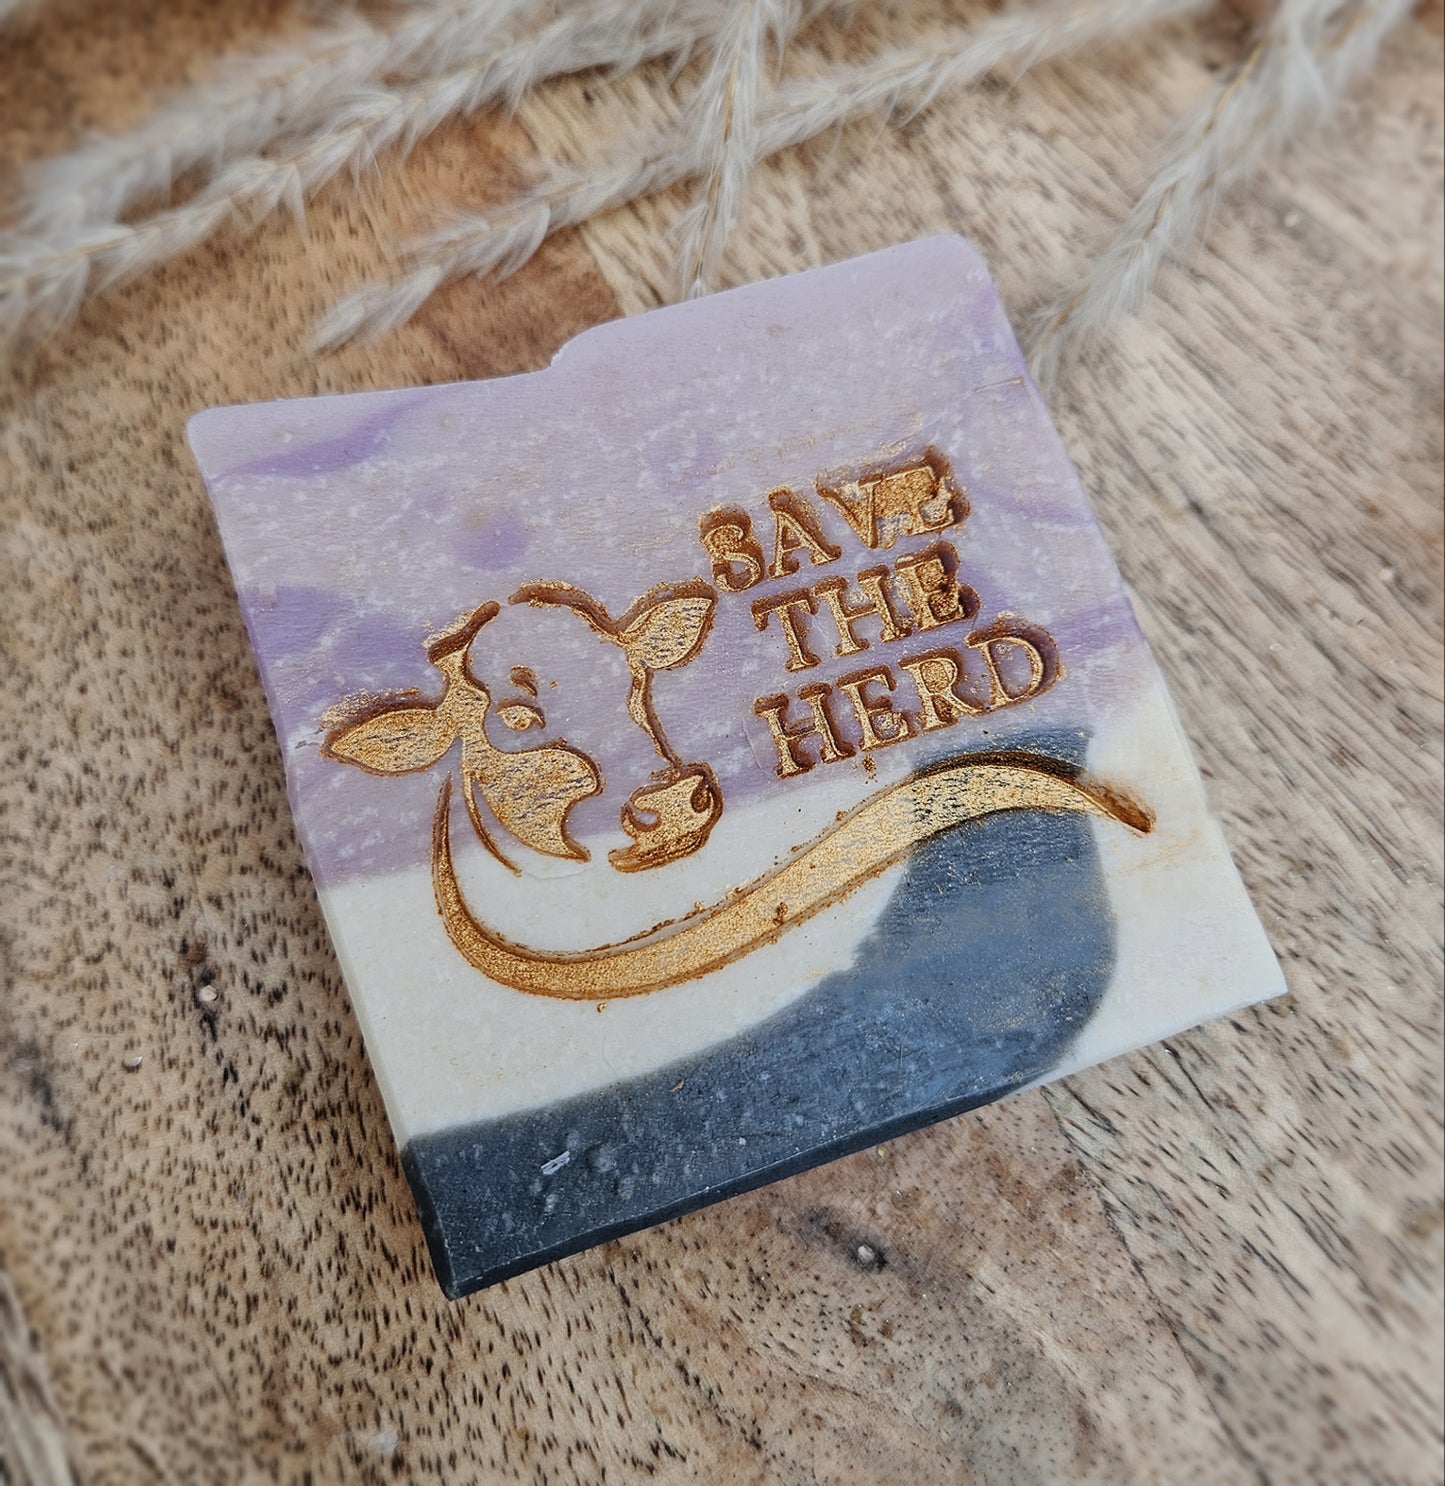 "Save the Herd!" - Cow Milk Soaps